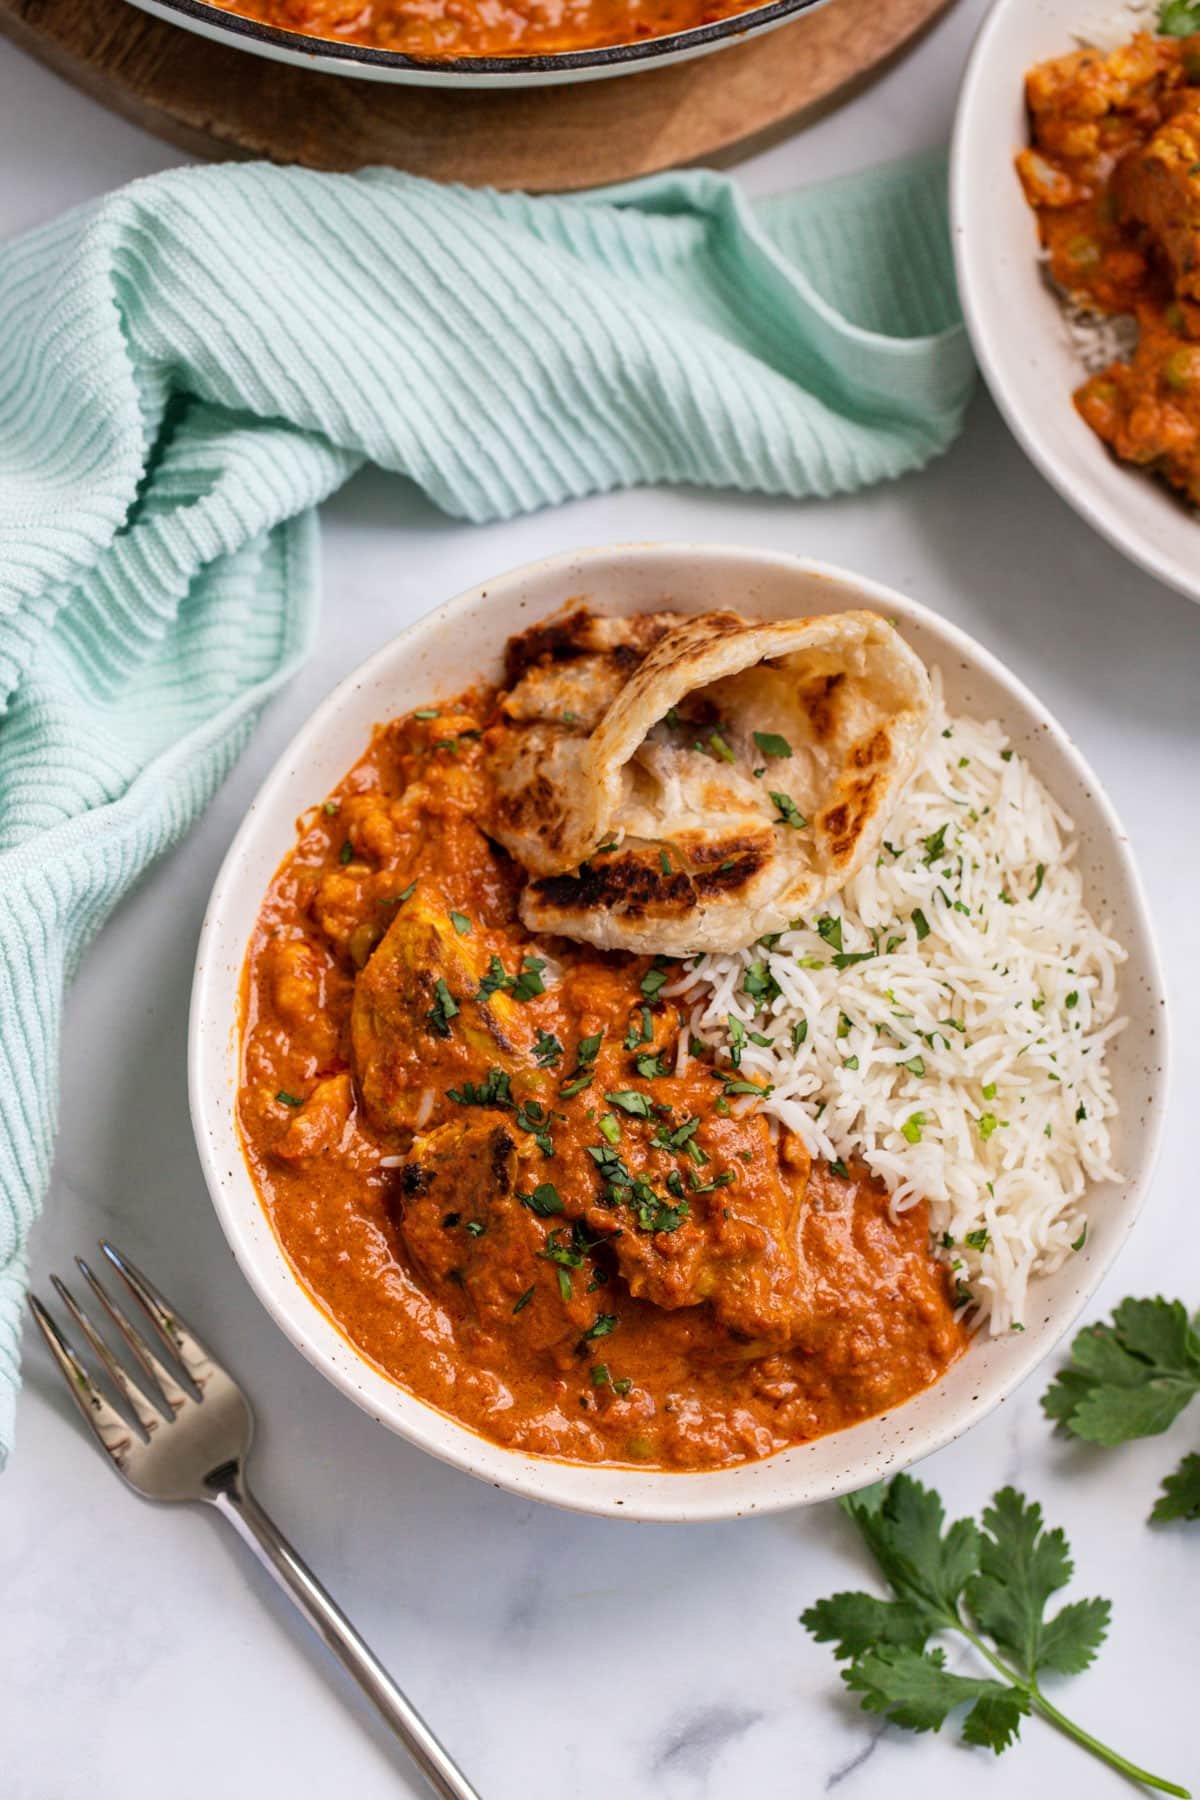 a bowl of tikka masala on a table with naan bread and herbs.